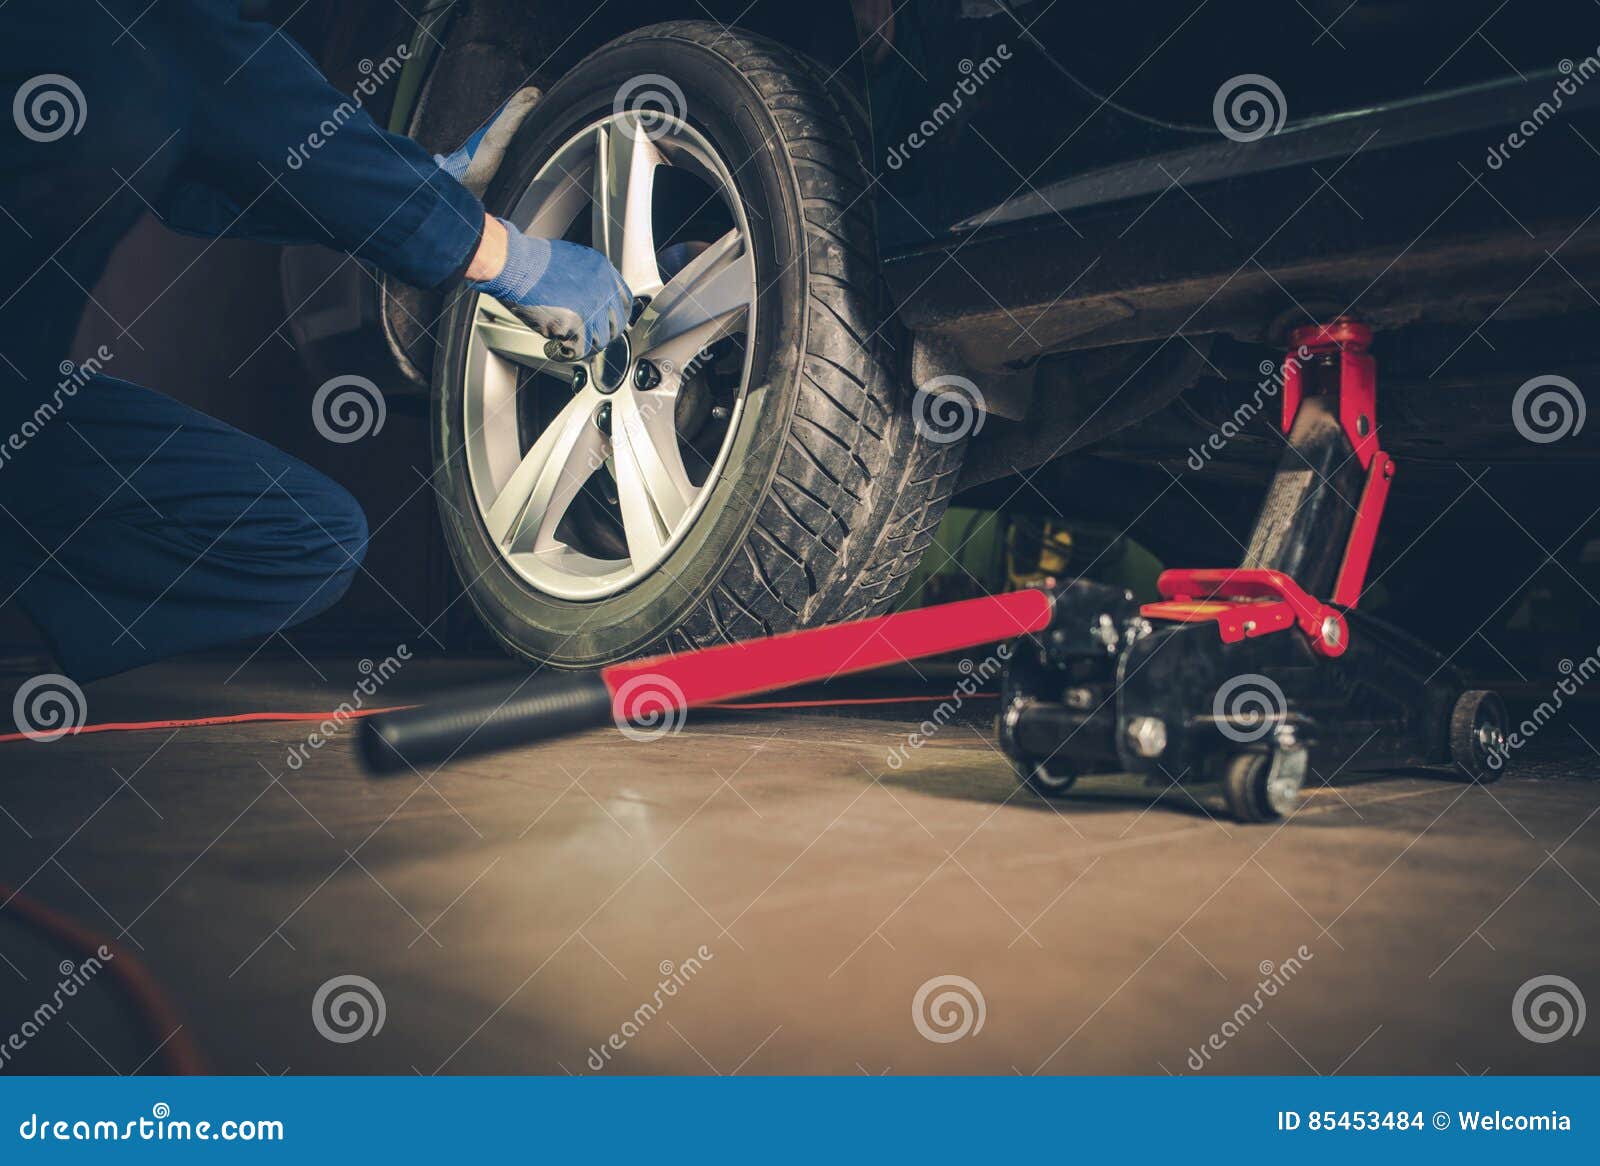 car tire replacement service